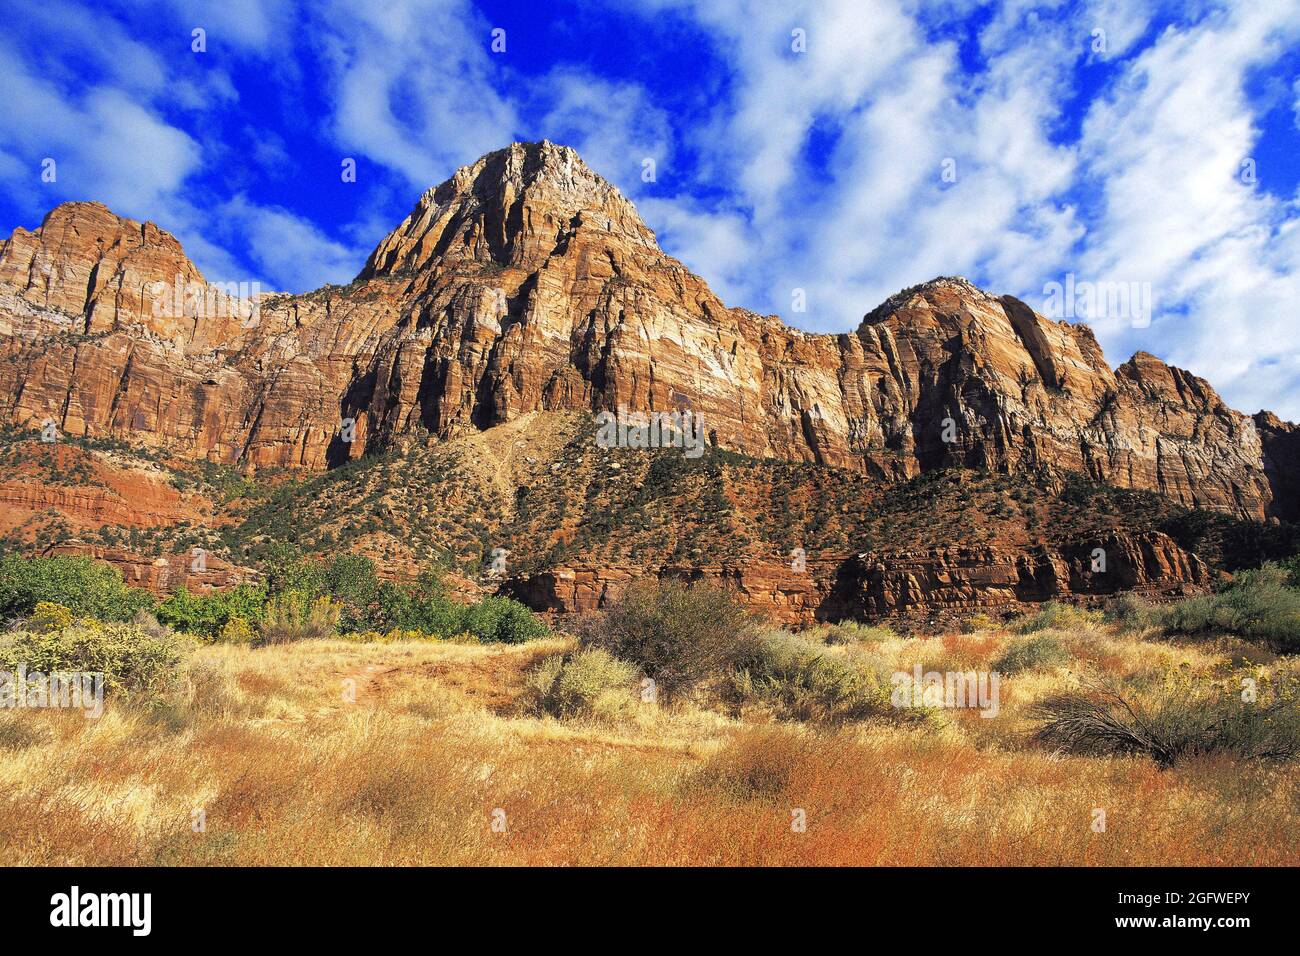 Rock peaks at the entrance to Zion Canyon, with red rock-faces and blue sky behind, USA, Utah, Zion National Park, Zion Canyon Stock Photo